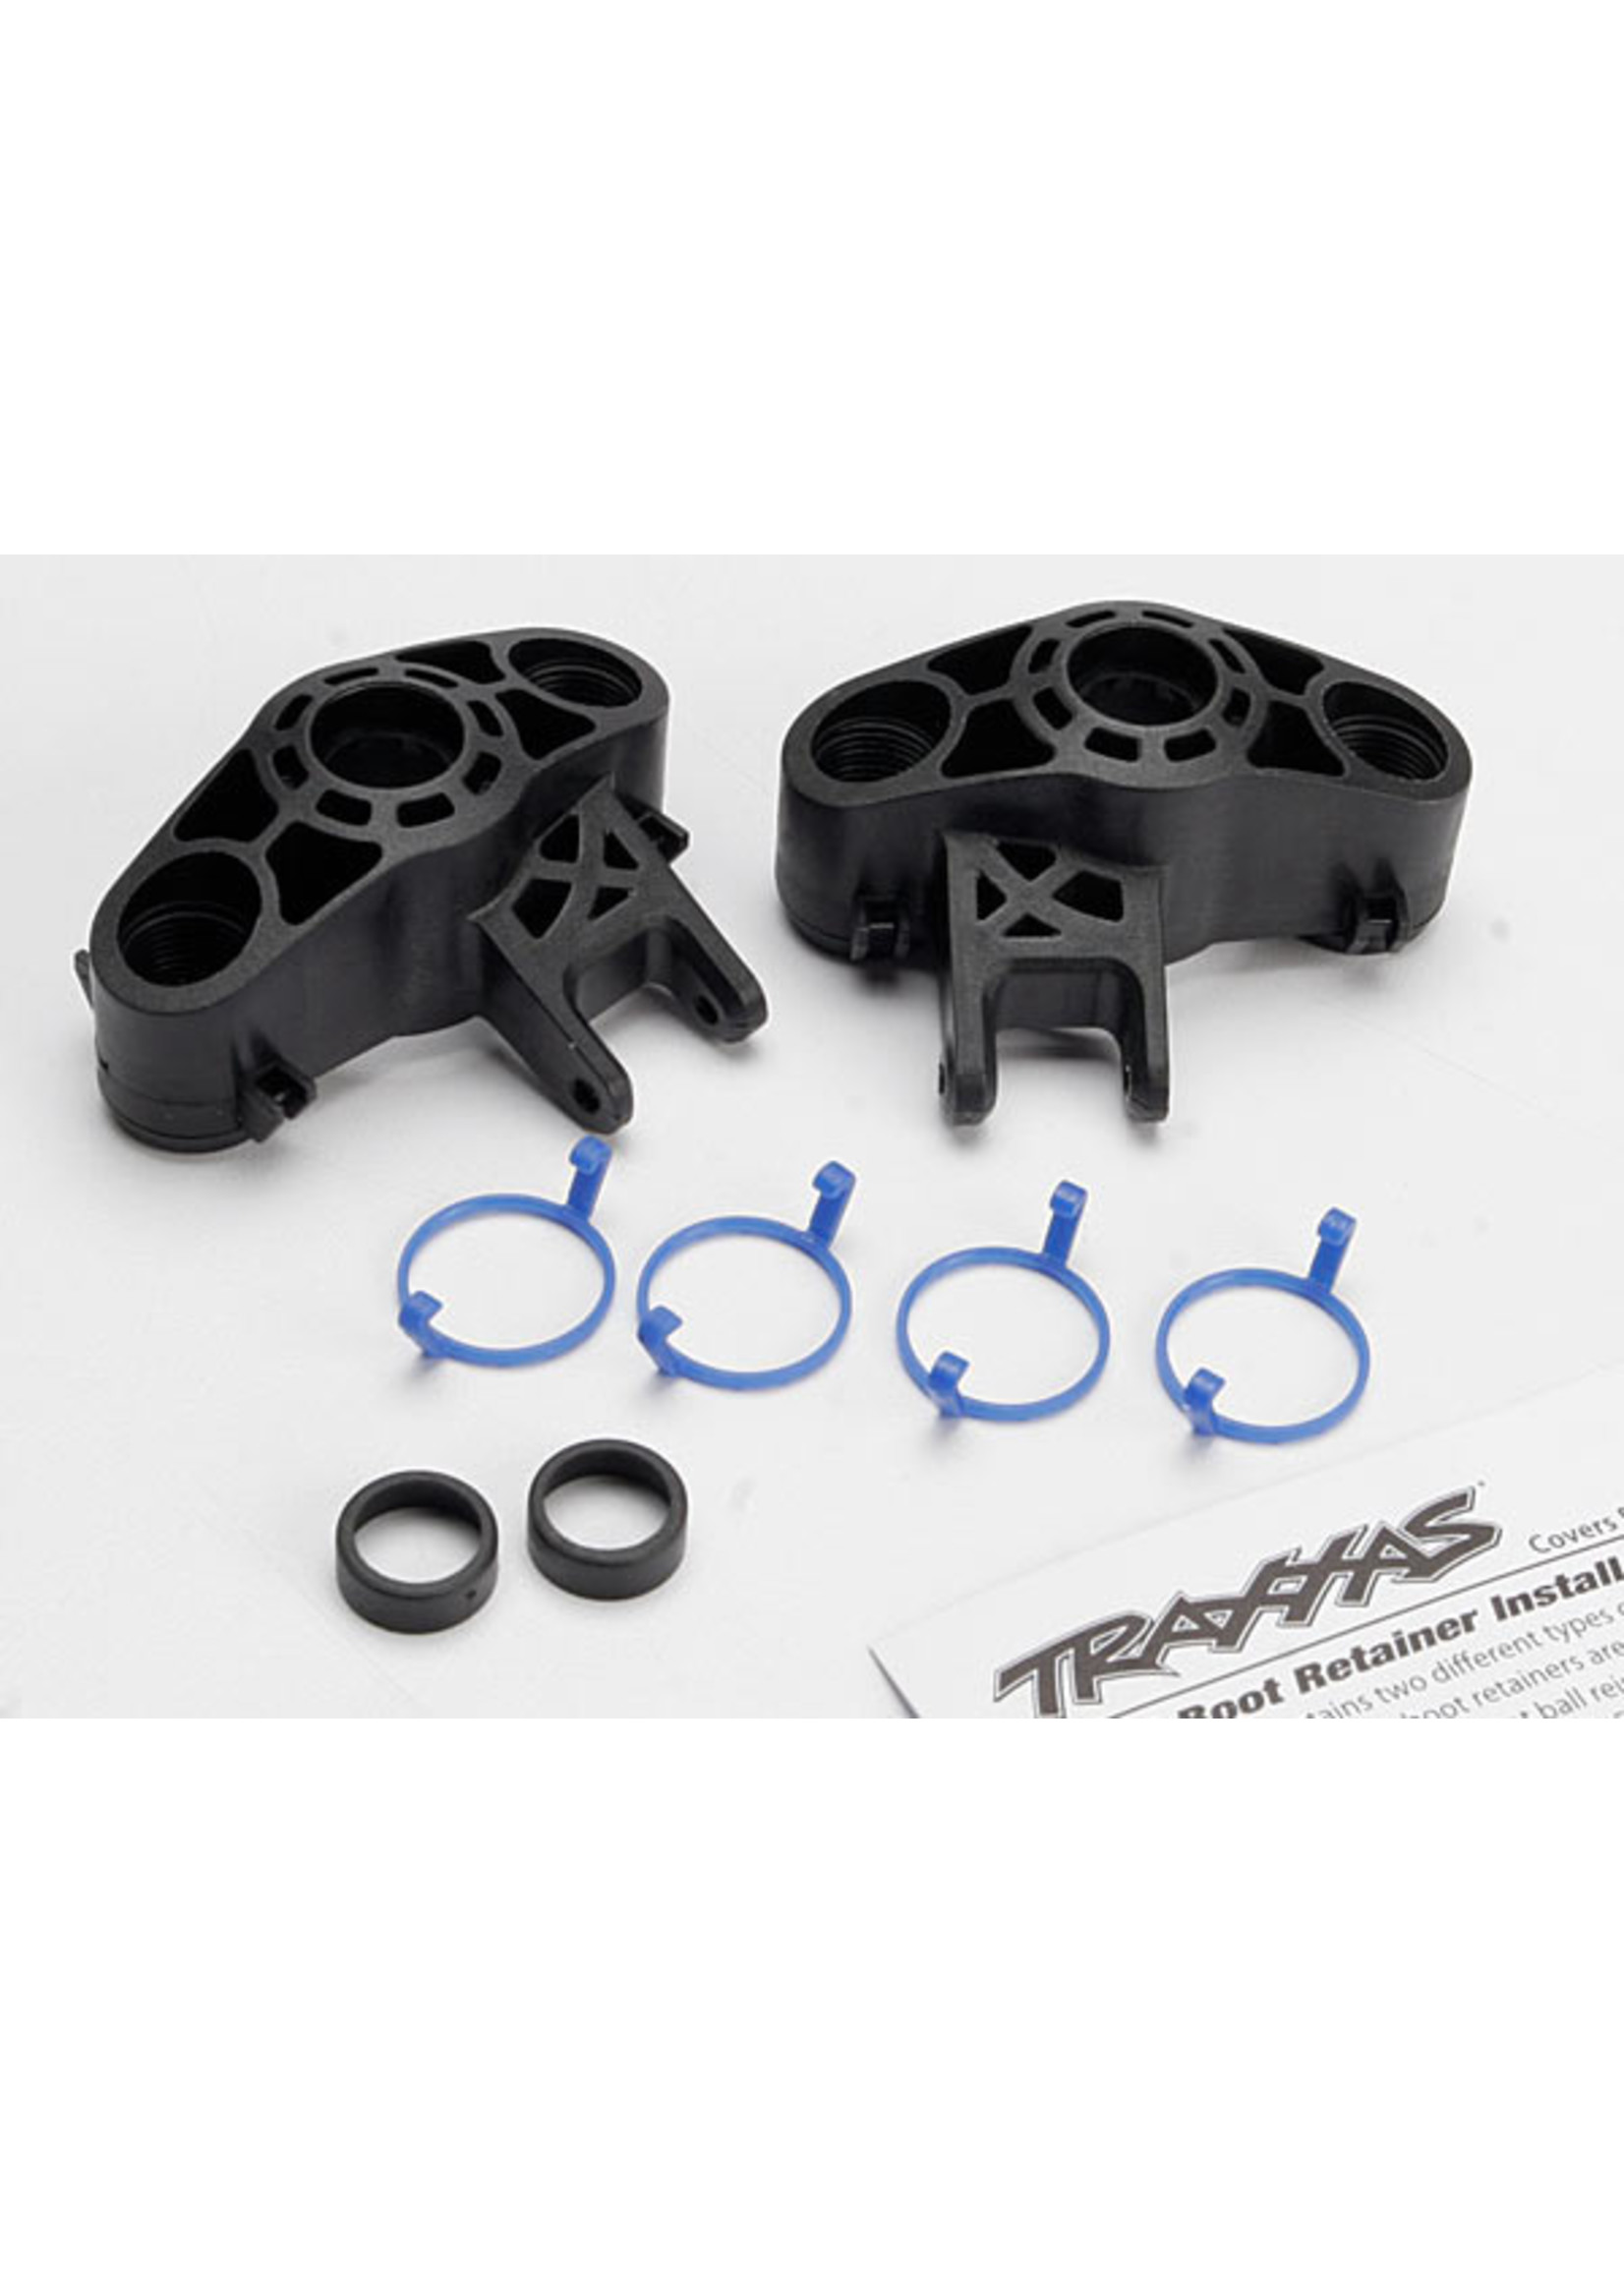 Traxxas 5334R - Axle Carriers, Left & Right